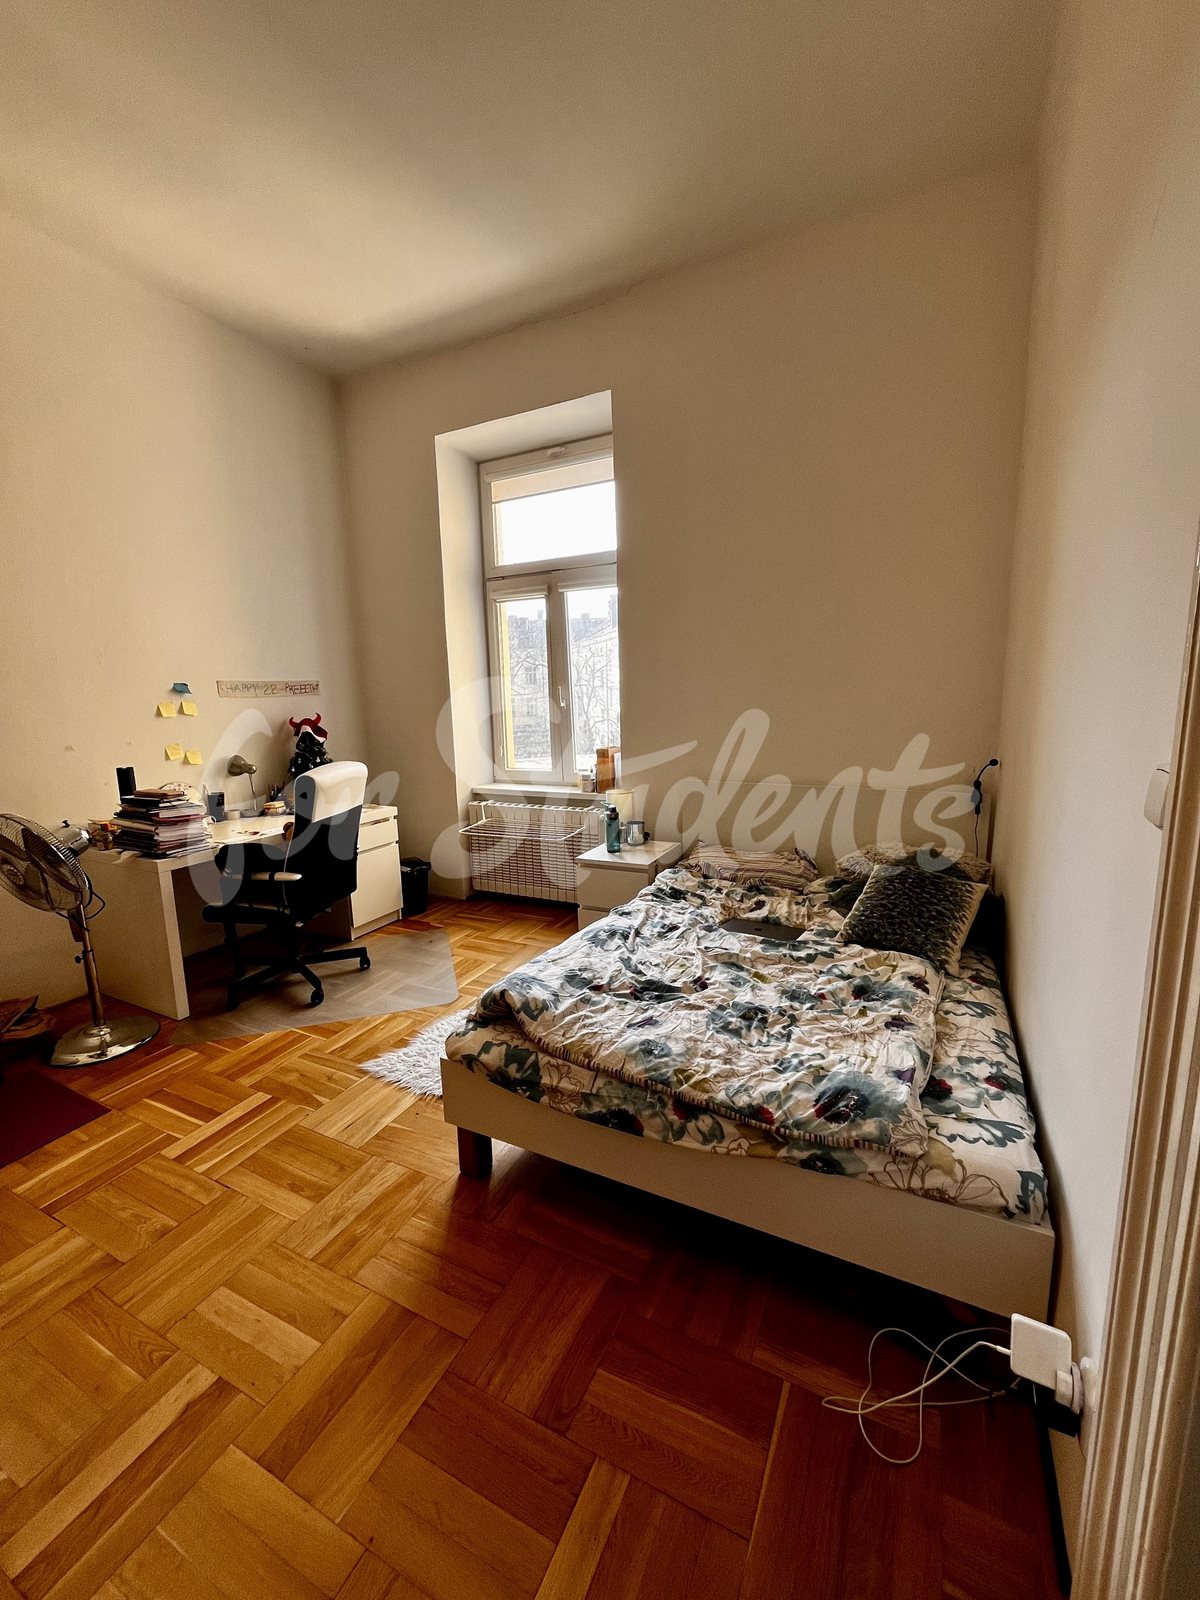 One bedroom available in female 3bedroom apartment in a student's house in the center of town, Hradec Králové